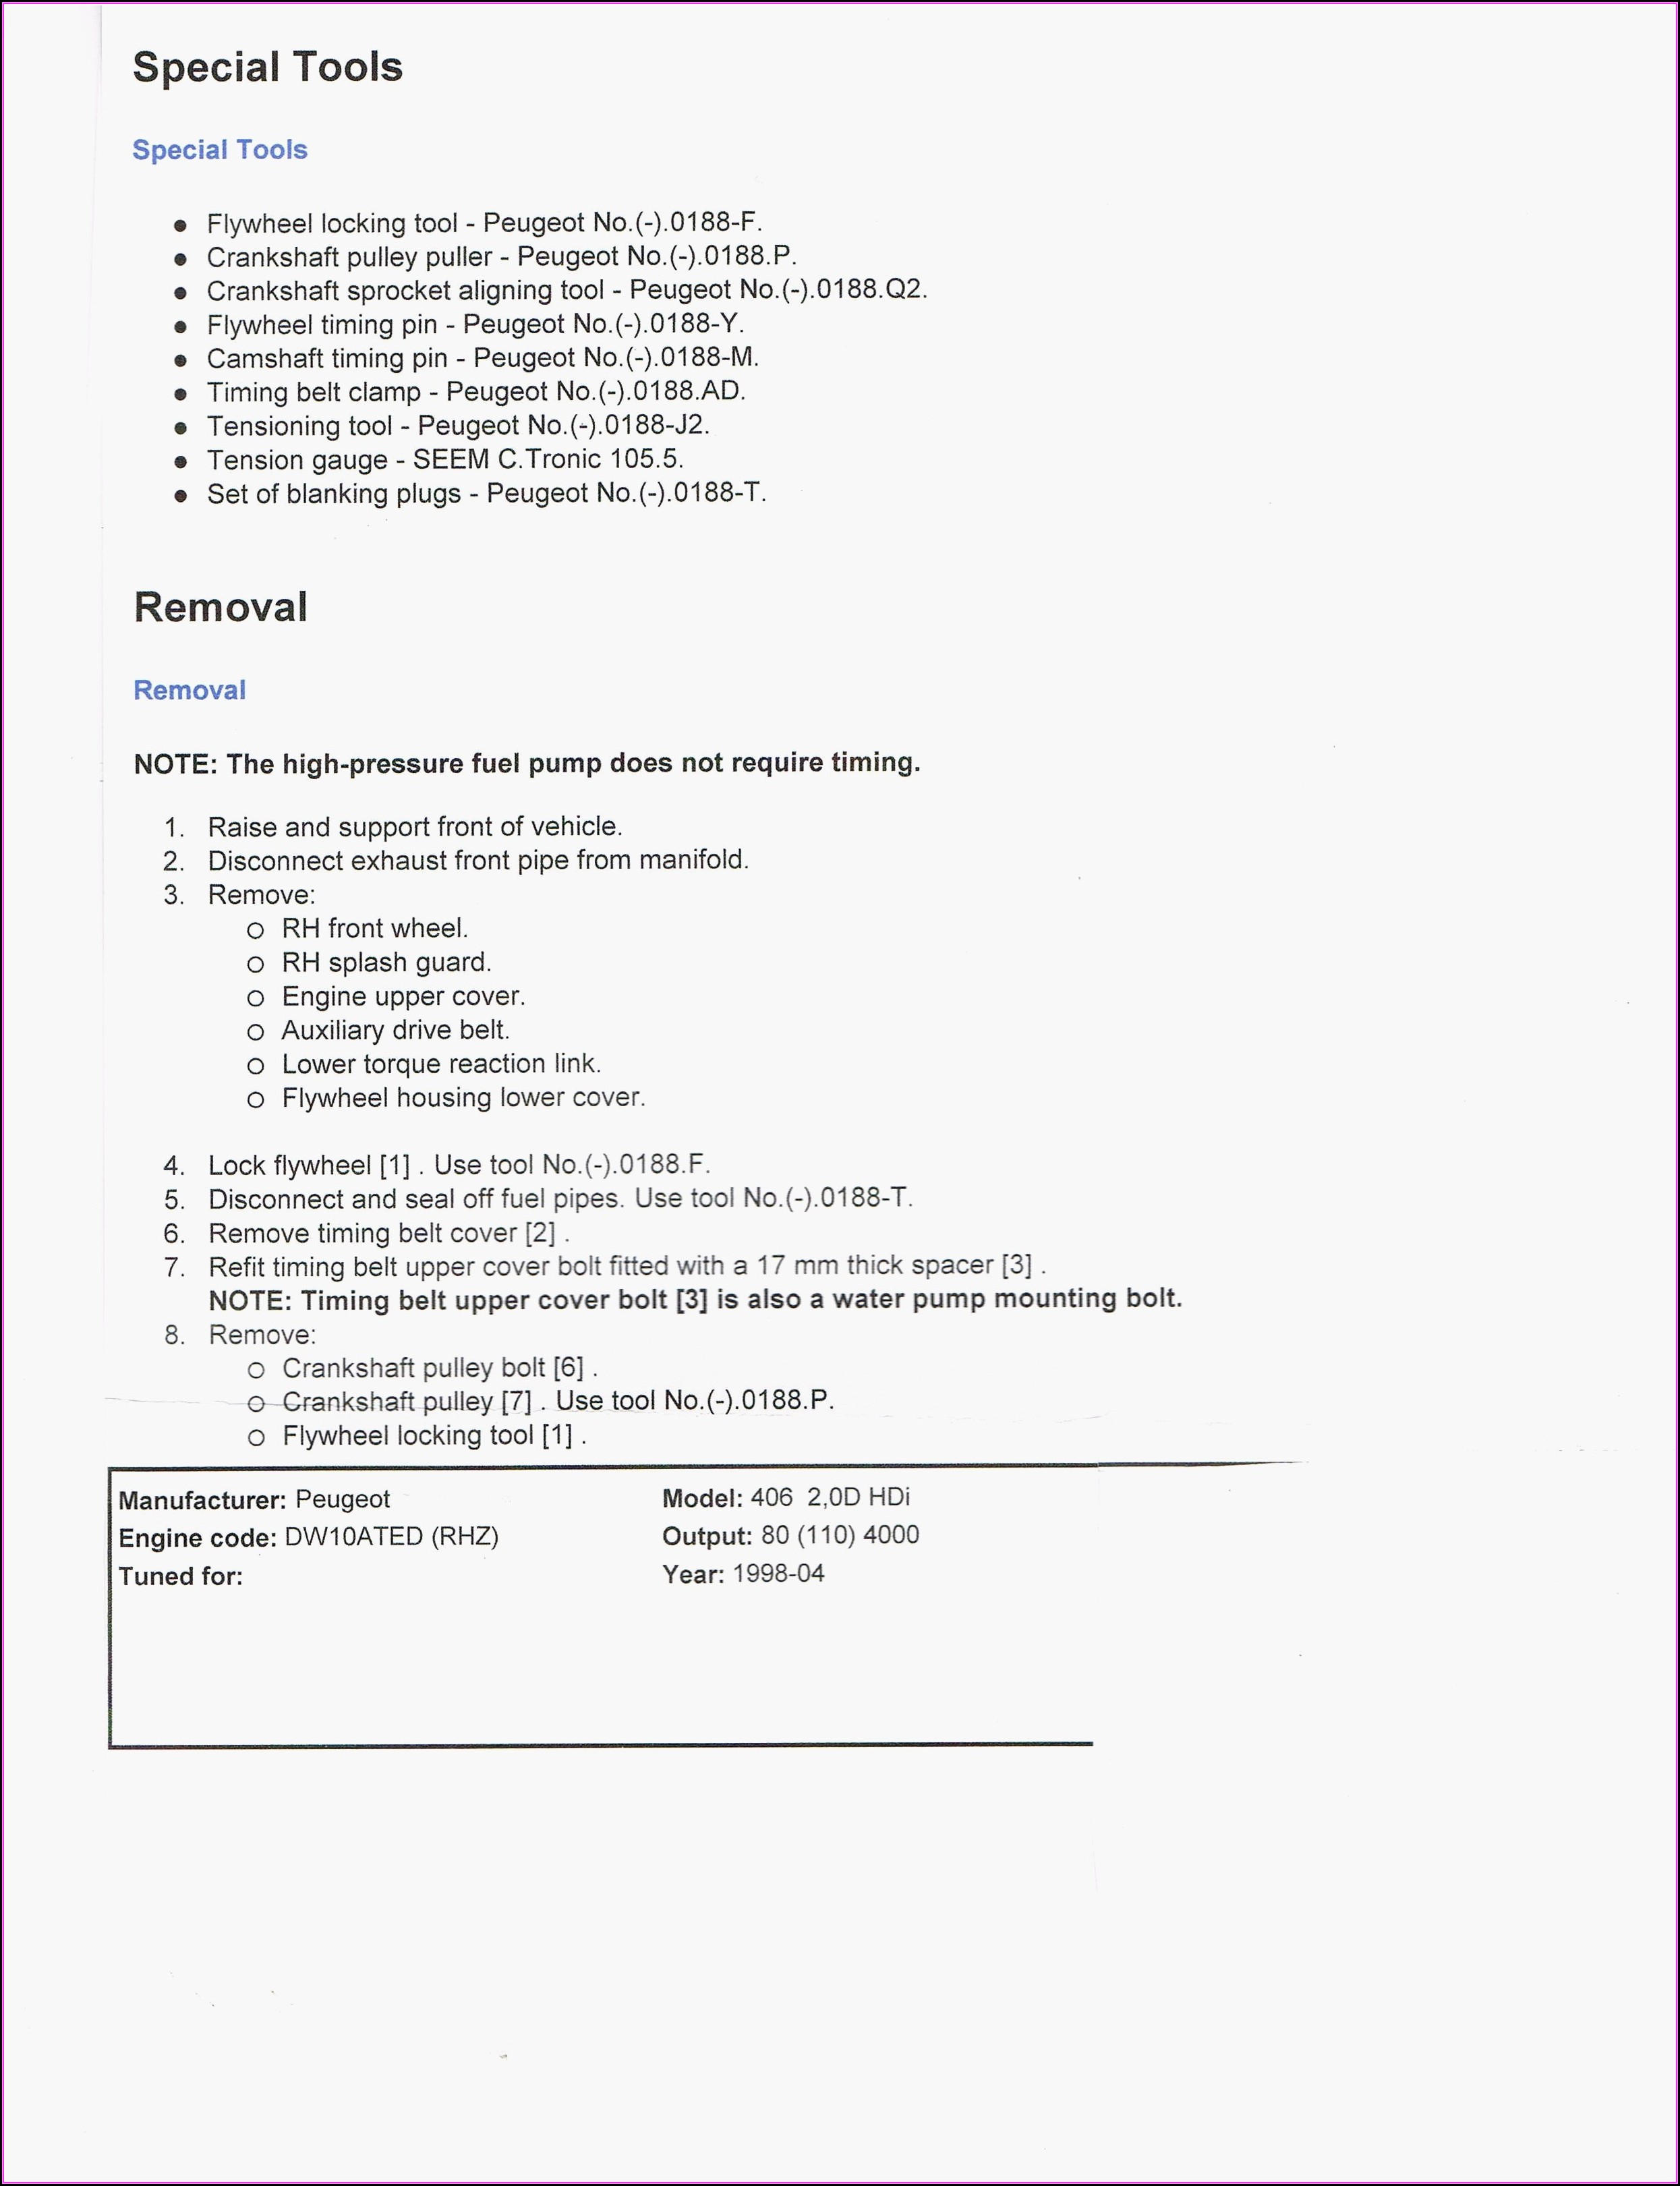 Online Free Resume Maker And Download